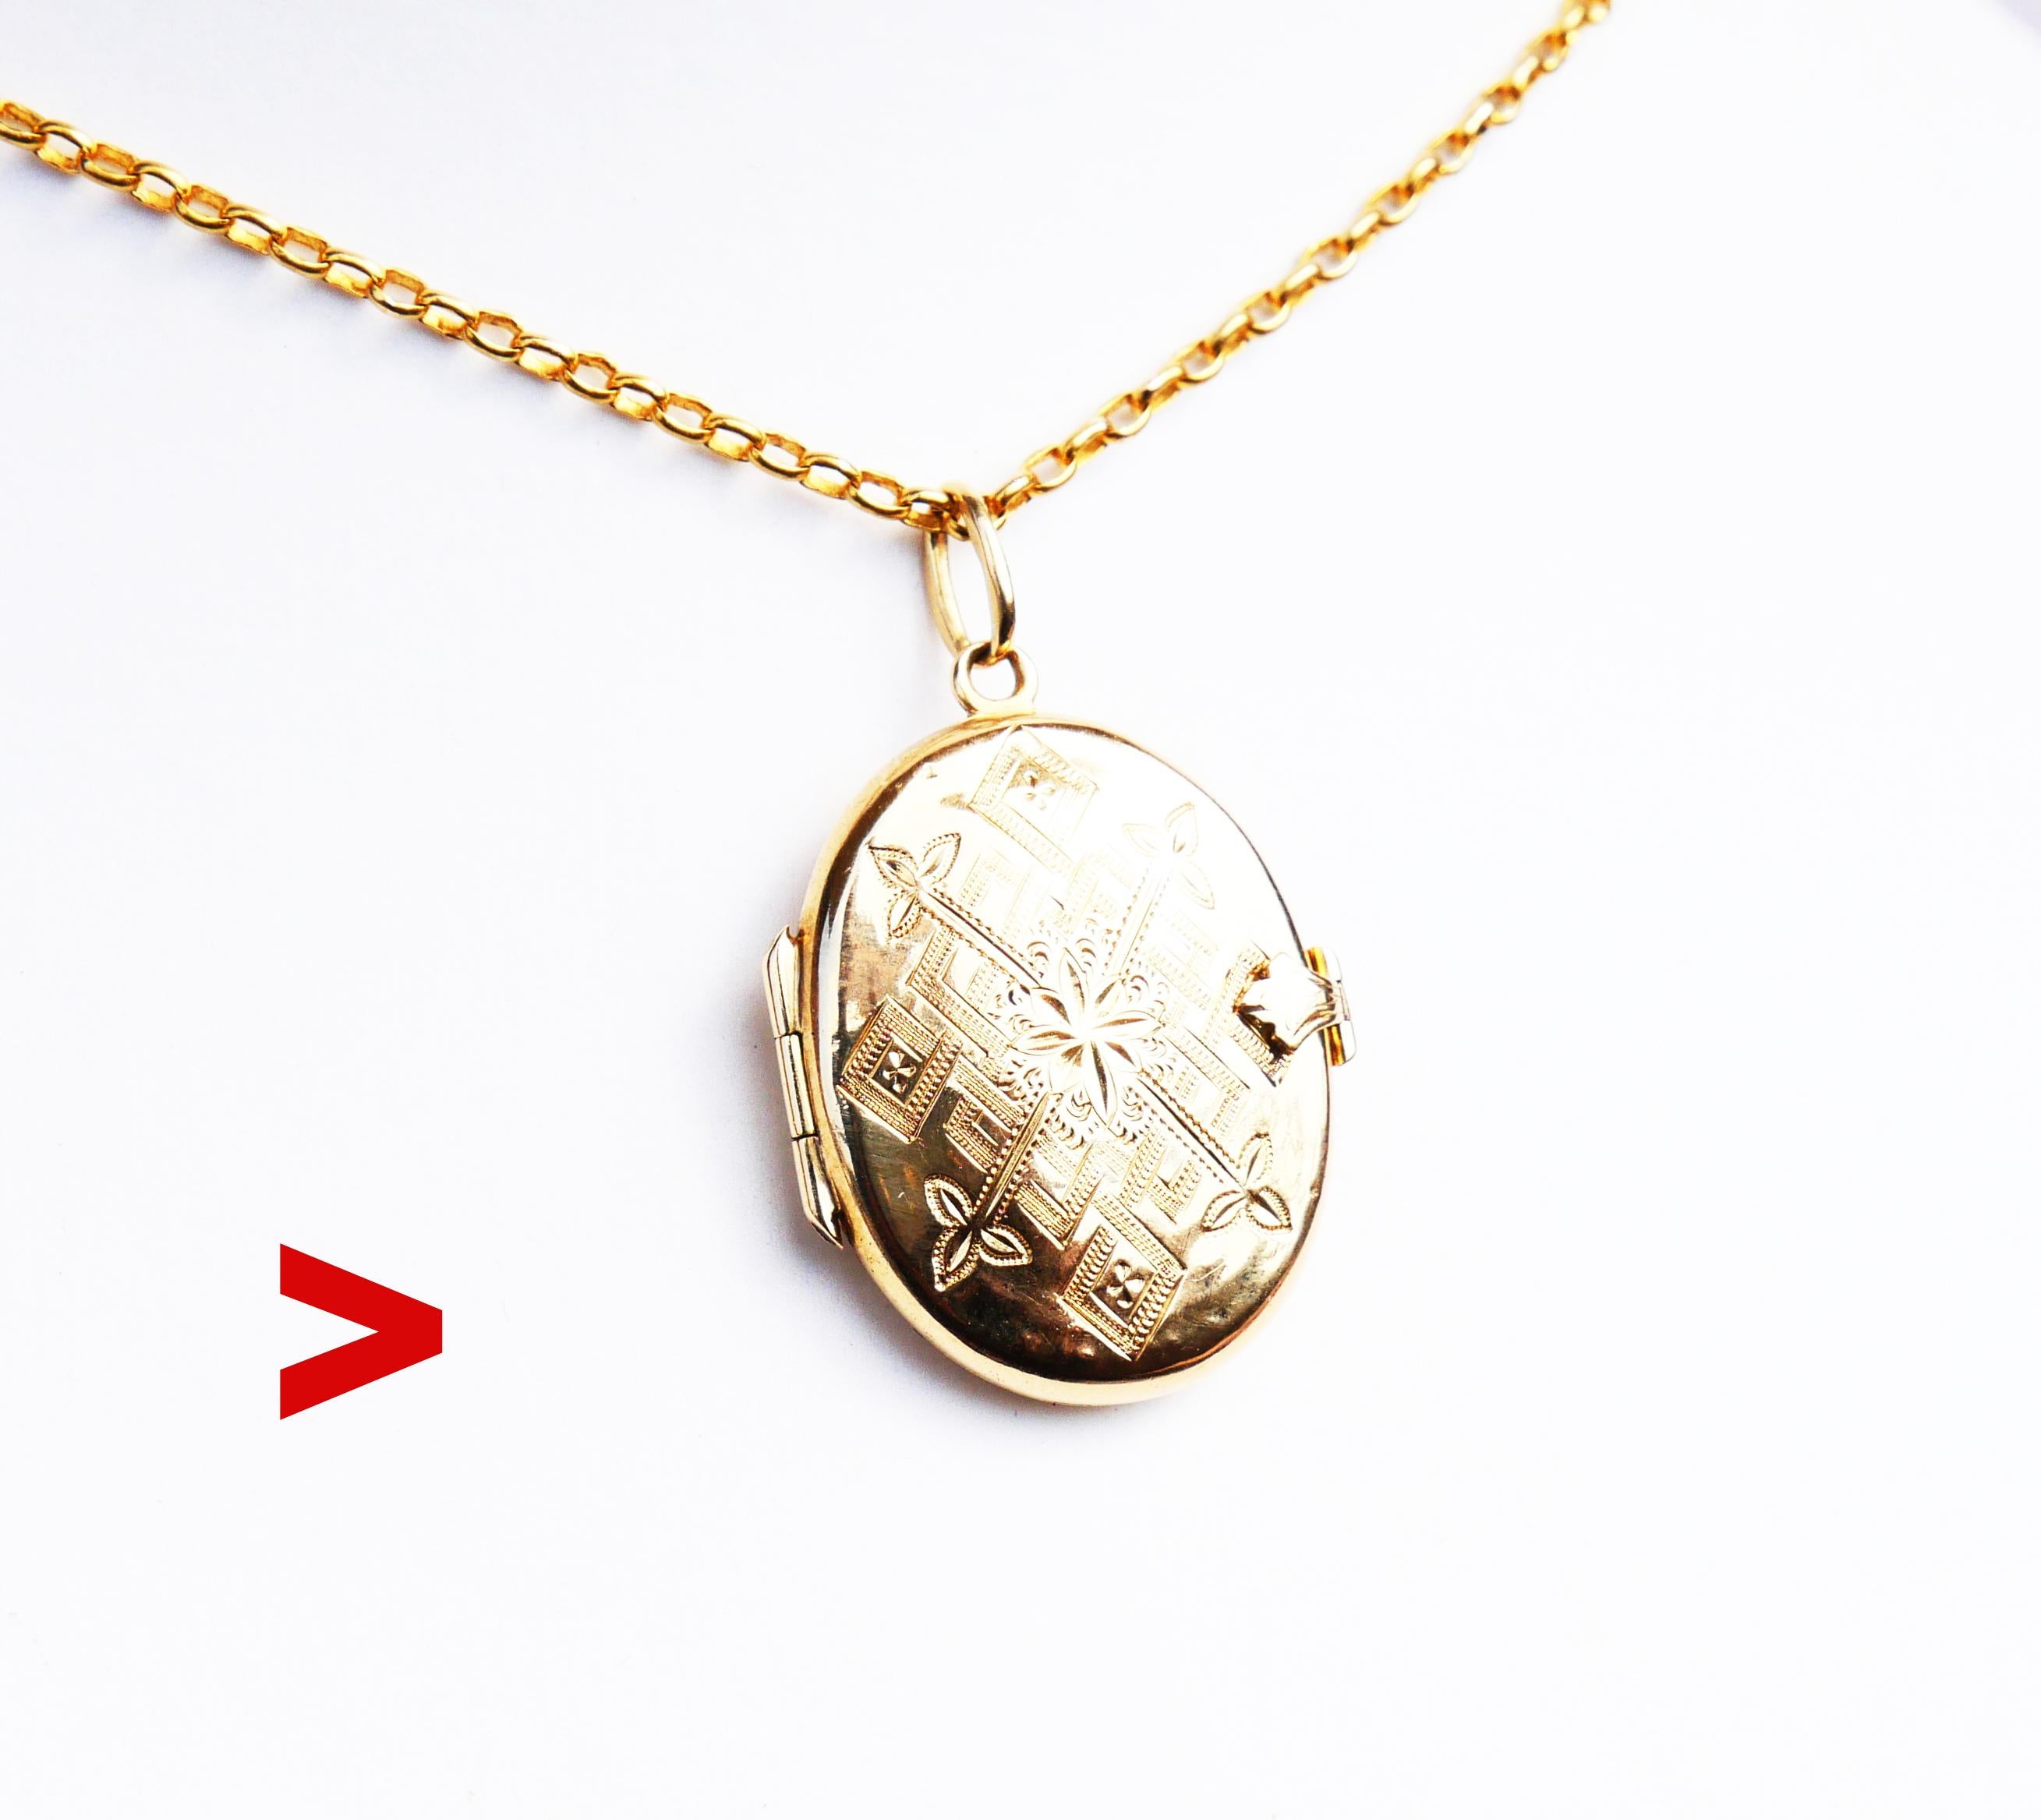 Antique Pendant / Locket in solid 18K Yellow Gold. Detailed hand - engravings of Eternity Knots in miniature proportions on both sides.

One sections with inner removable bezel inside.

Swedish locket , hallmarked 18K , unknown maker's marks. Year